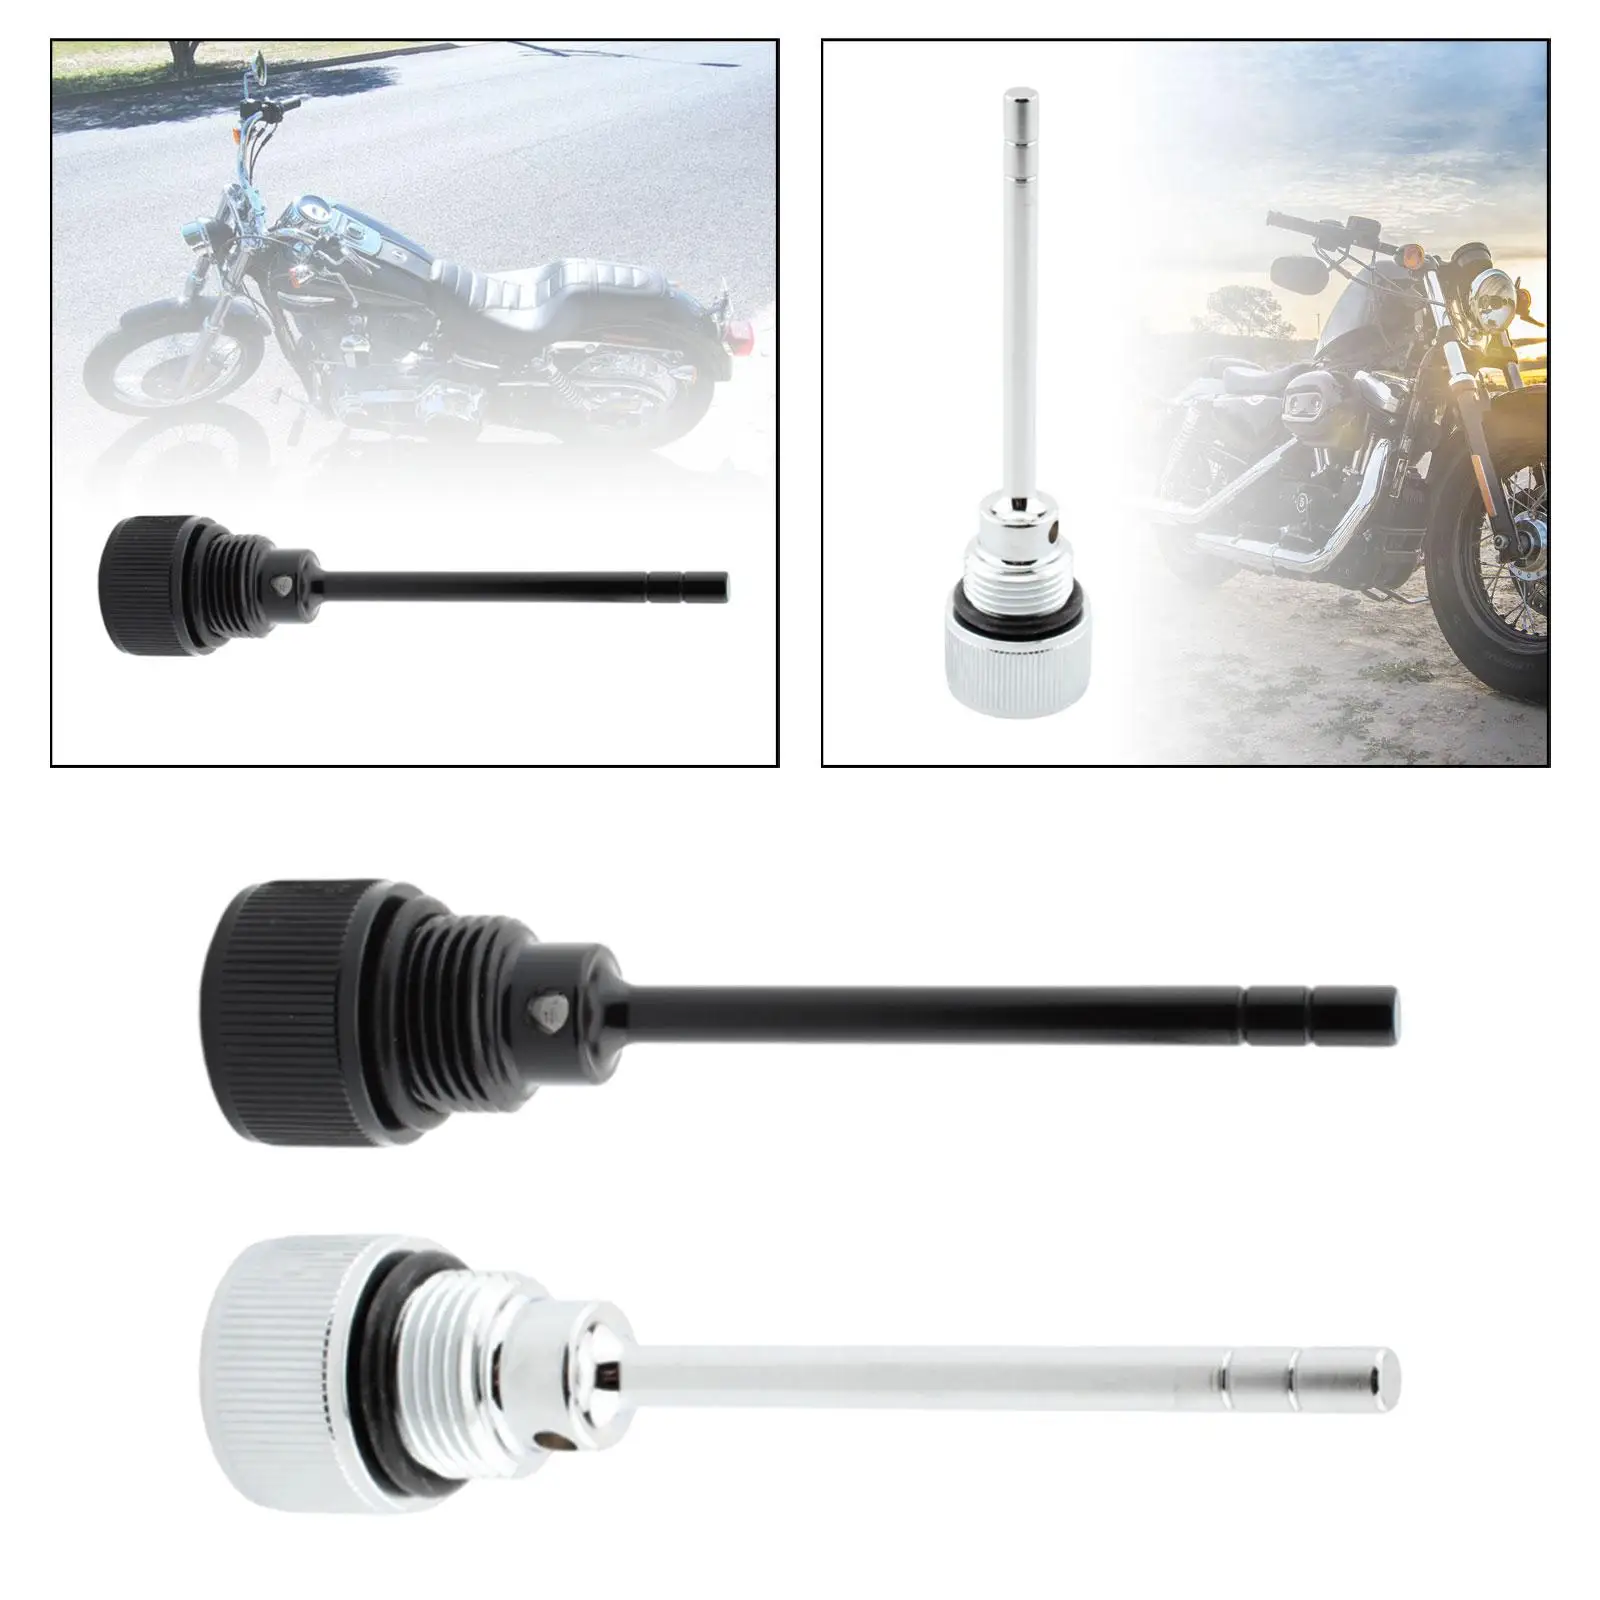 Transmission Dipstick Replaces for Fxs Deluxe Flde Classic Efi Flhtci